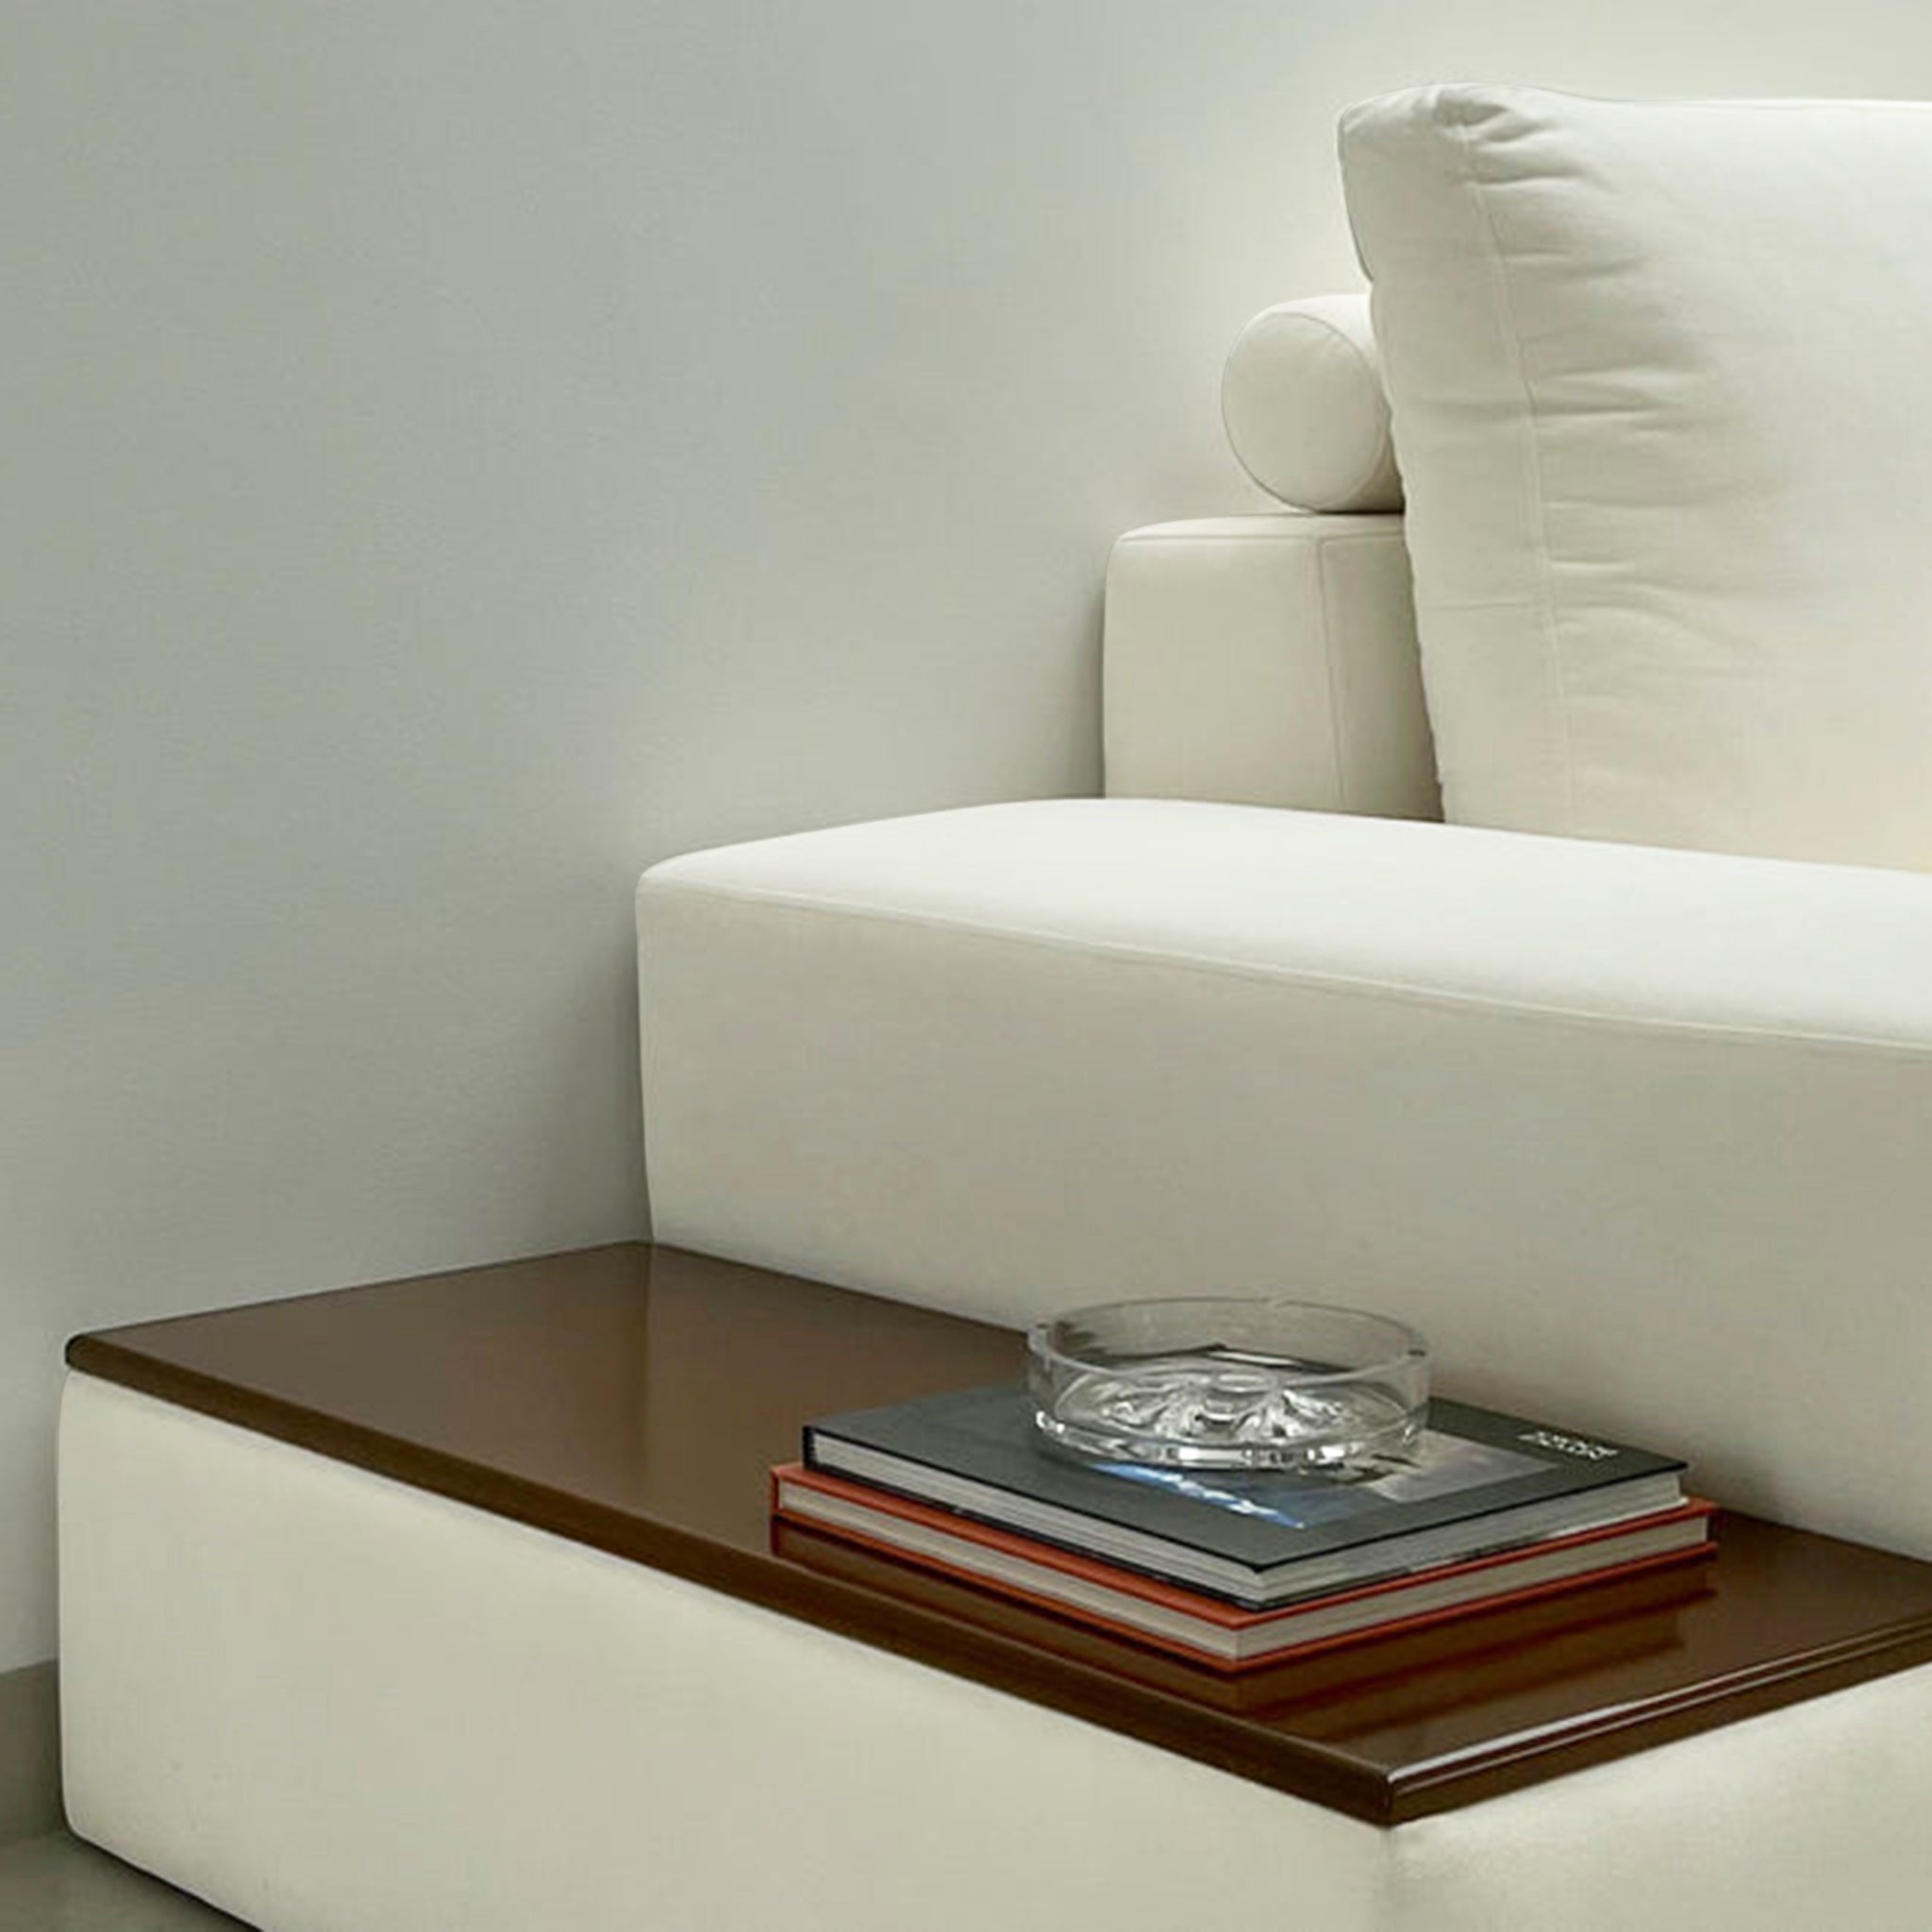 Close-up view of a white sofa with a built-in wooden side table, featuring books and a glass ashtray, showcasing a modern and functional living room design.